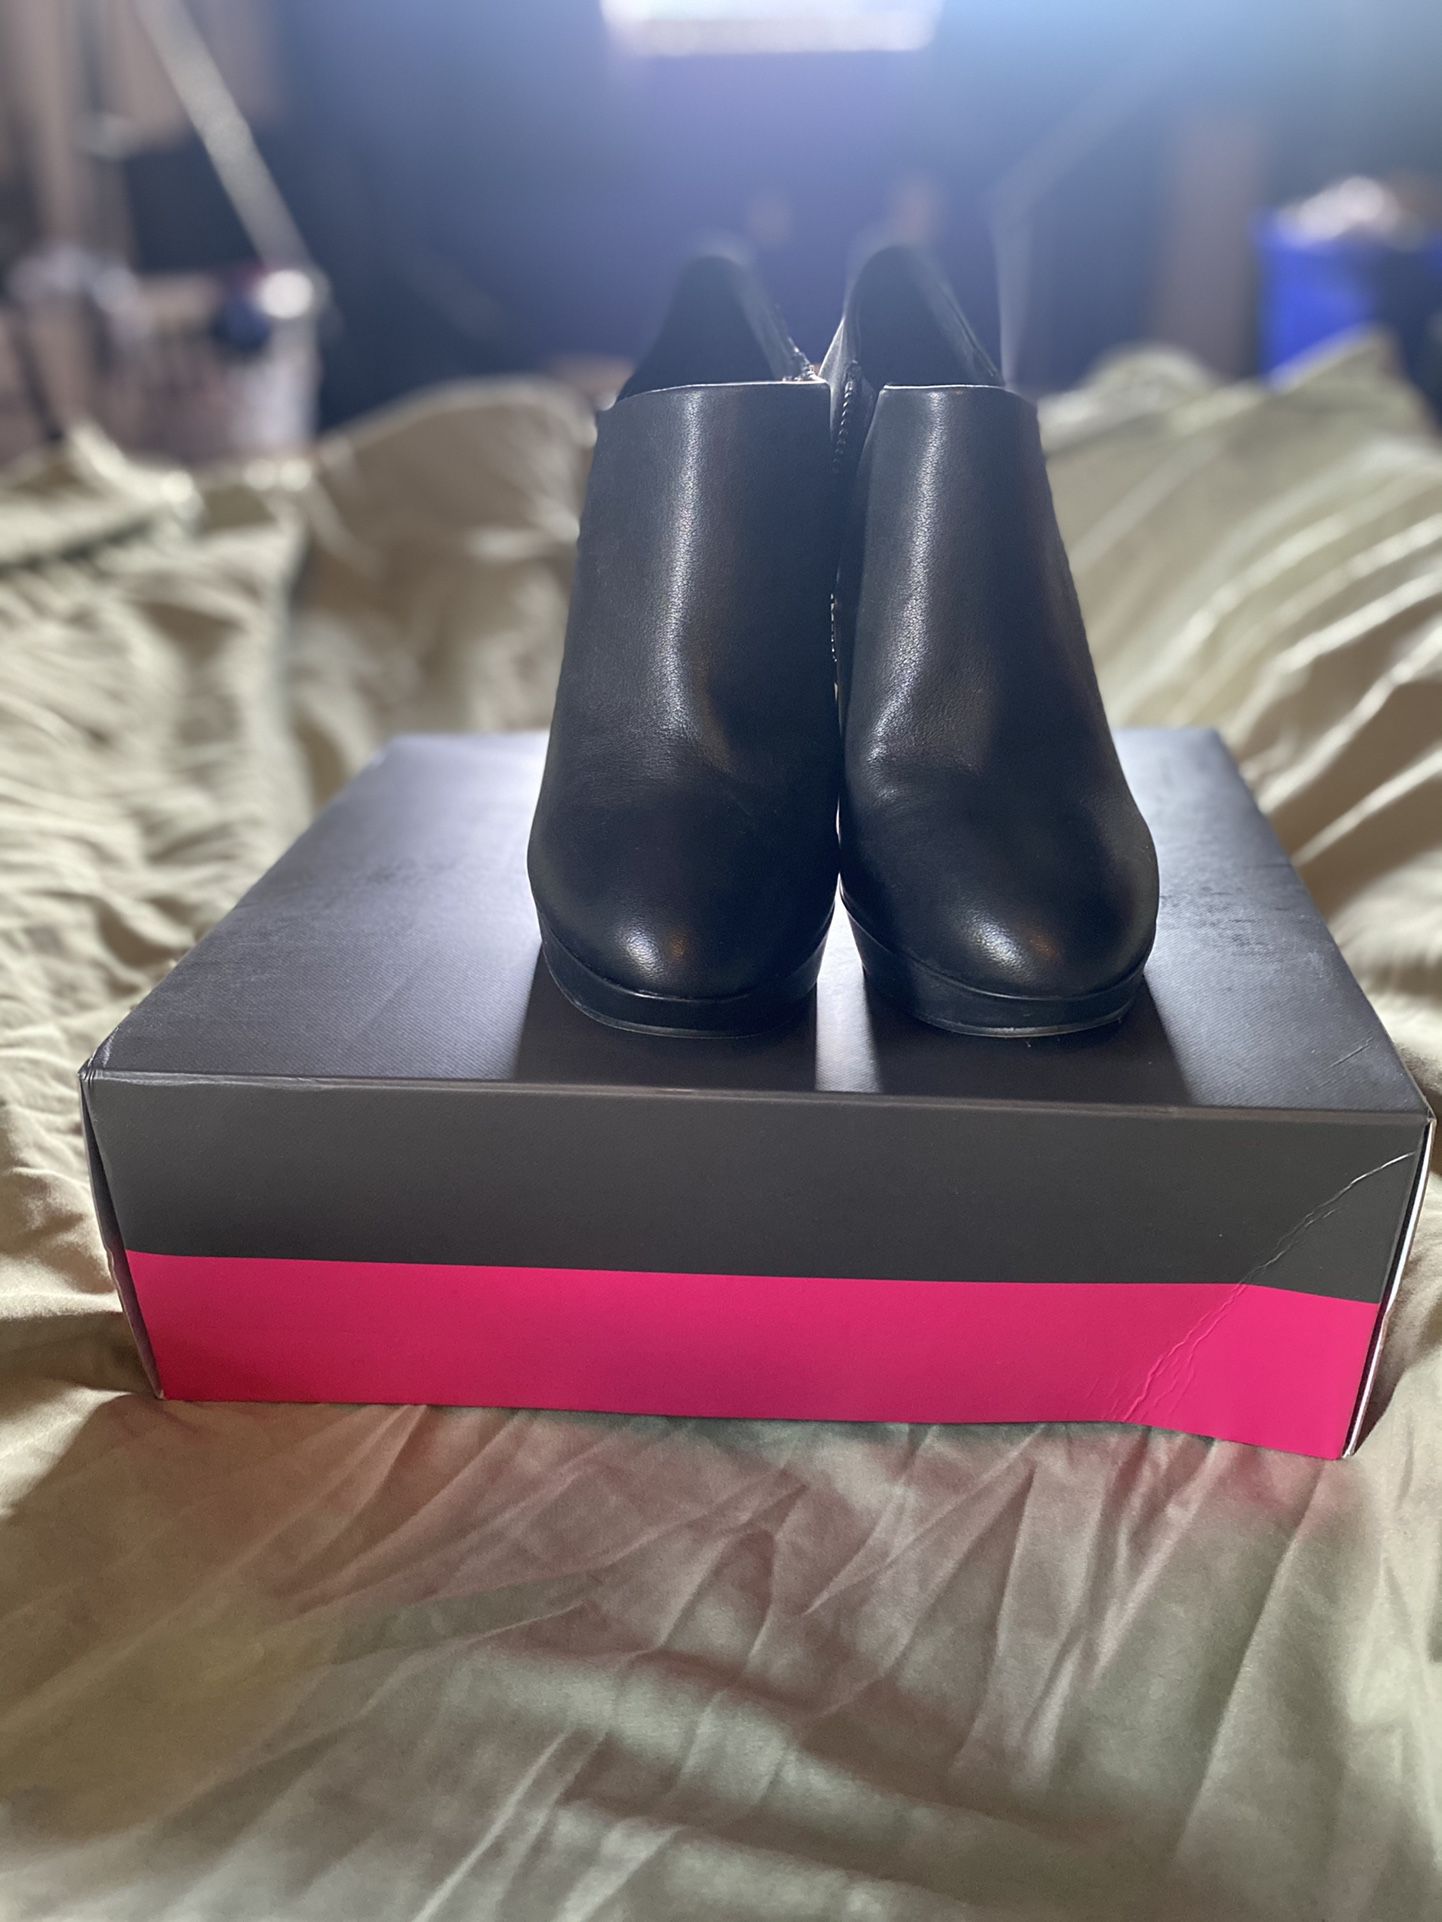 Vince Camuto Black Booties Size 6